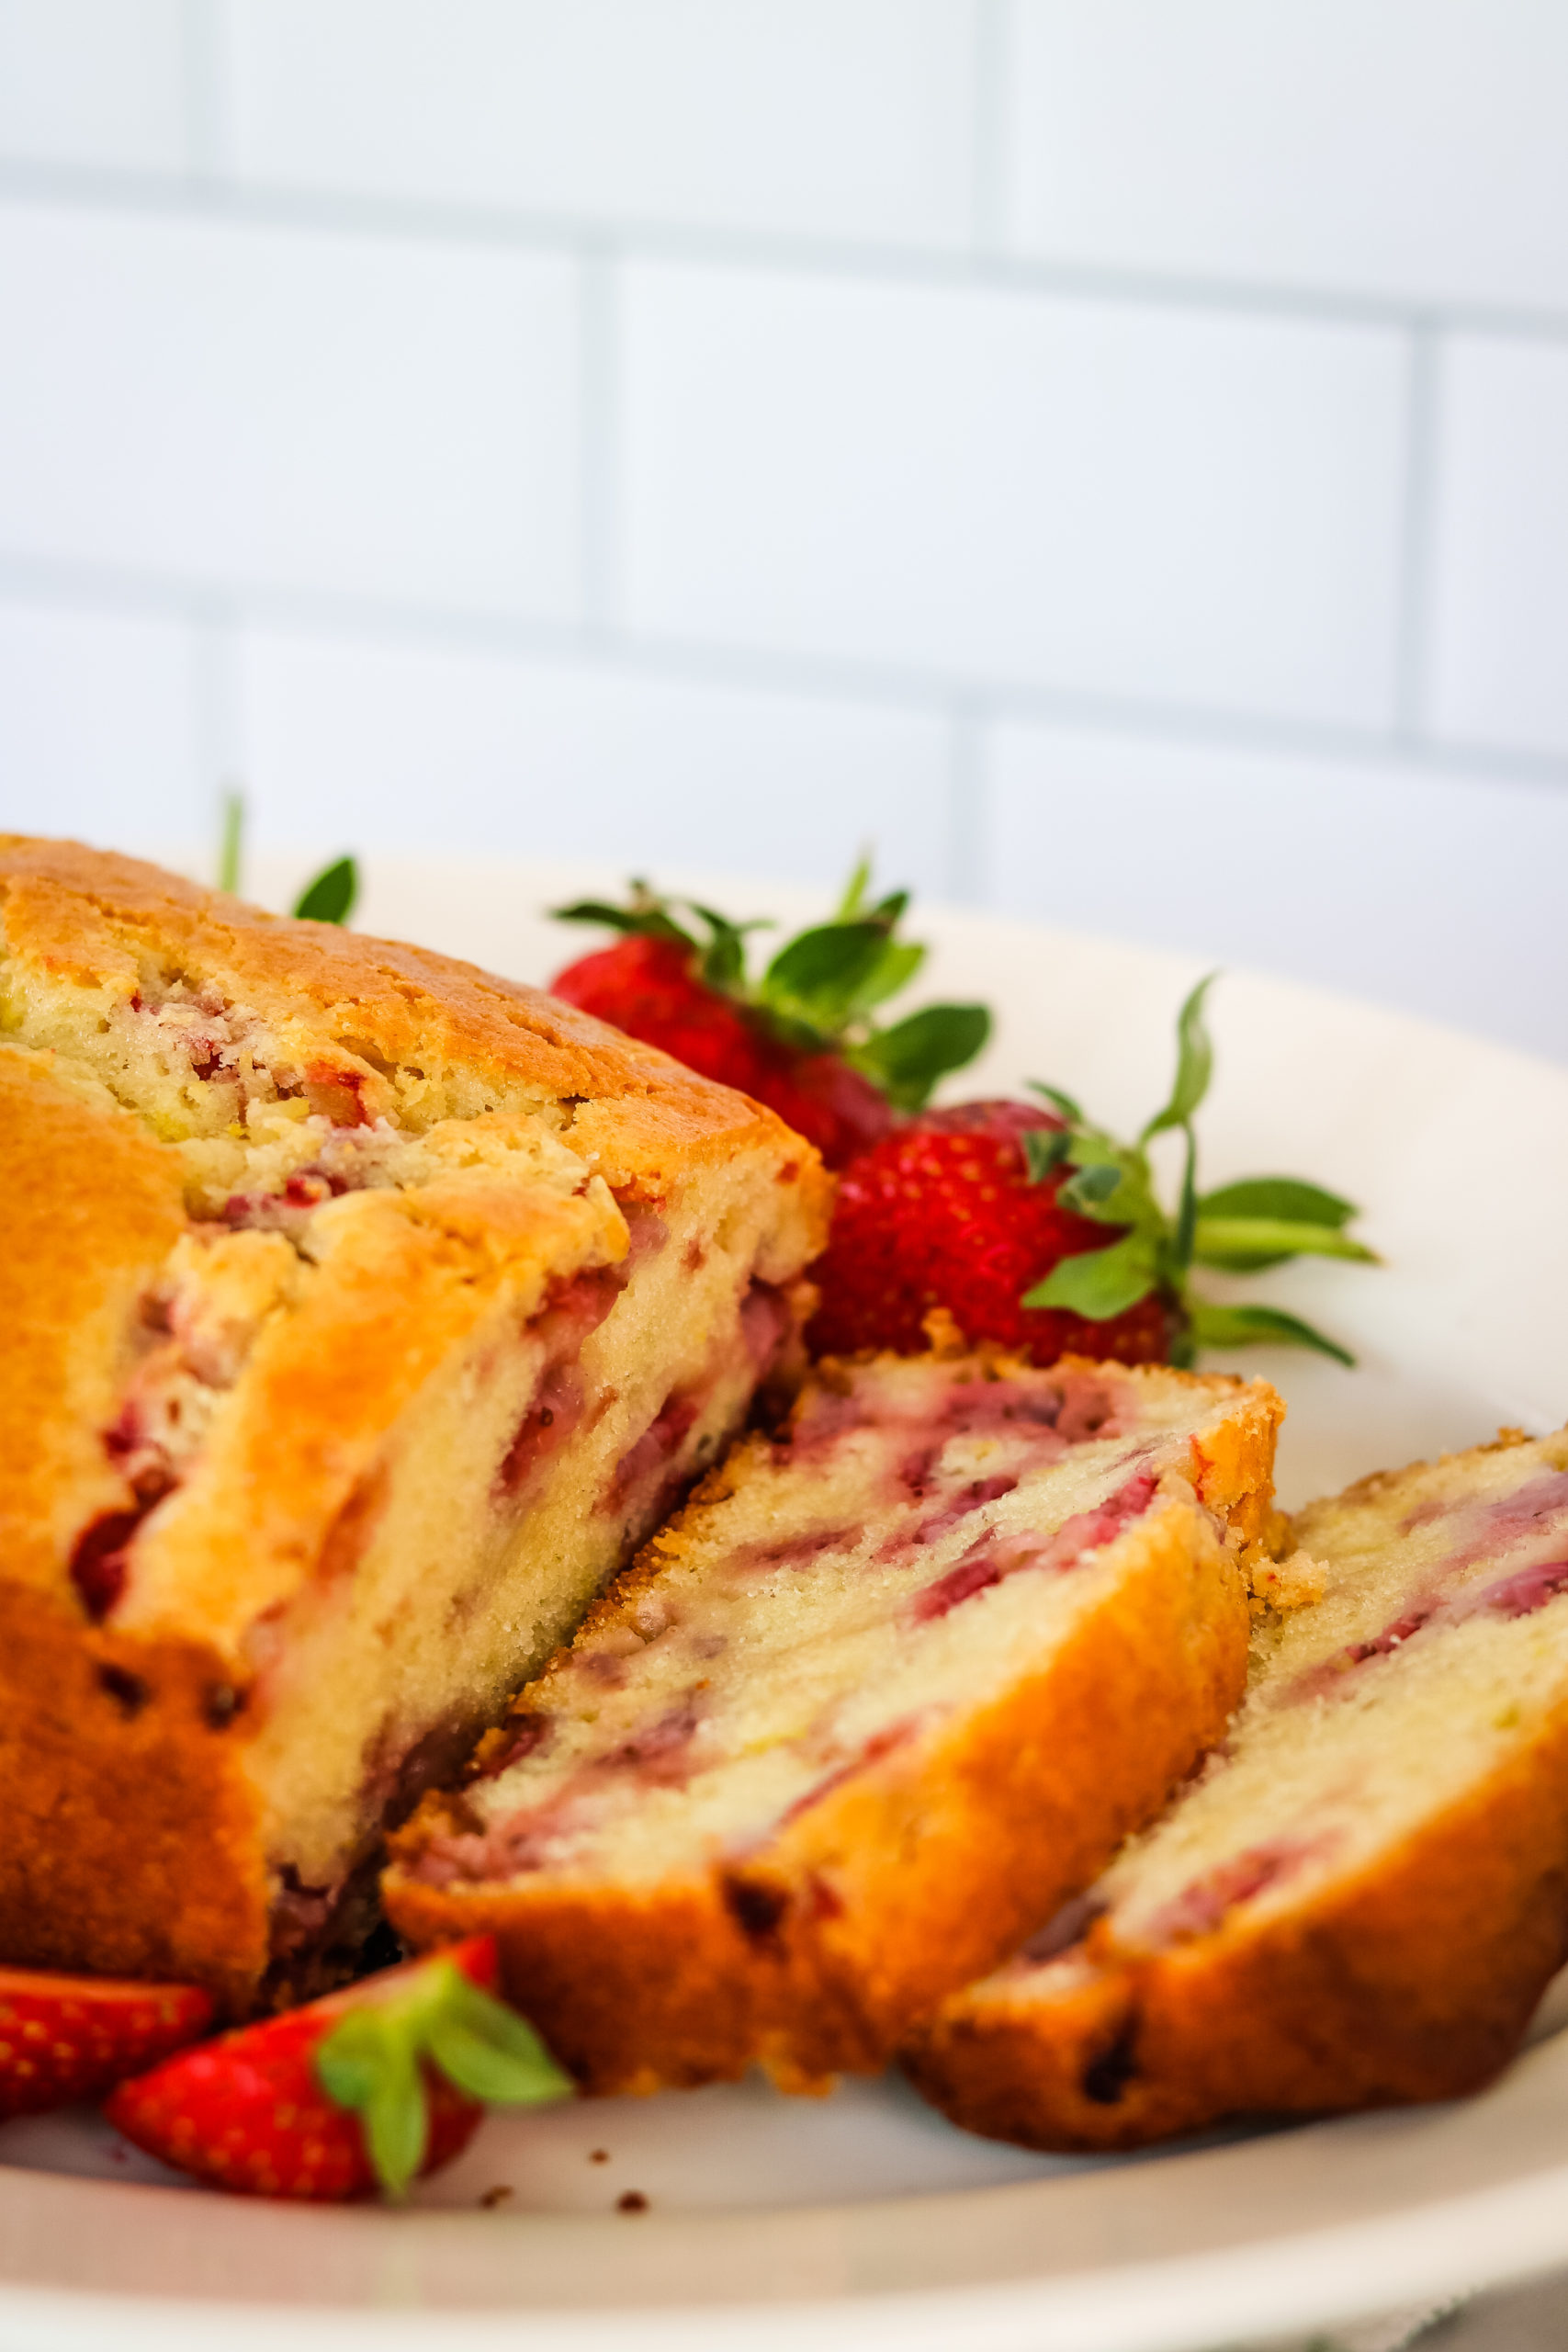 A loaf of Strawberry Bread with some slices.